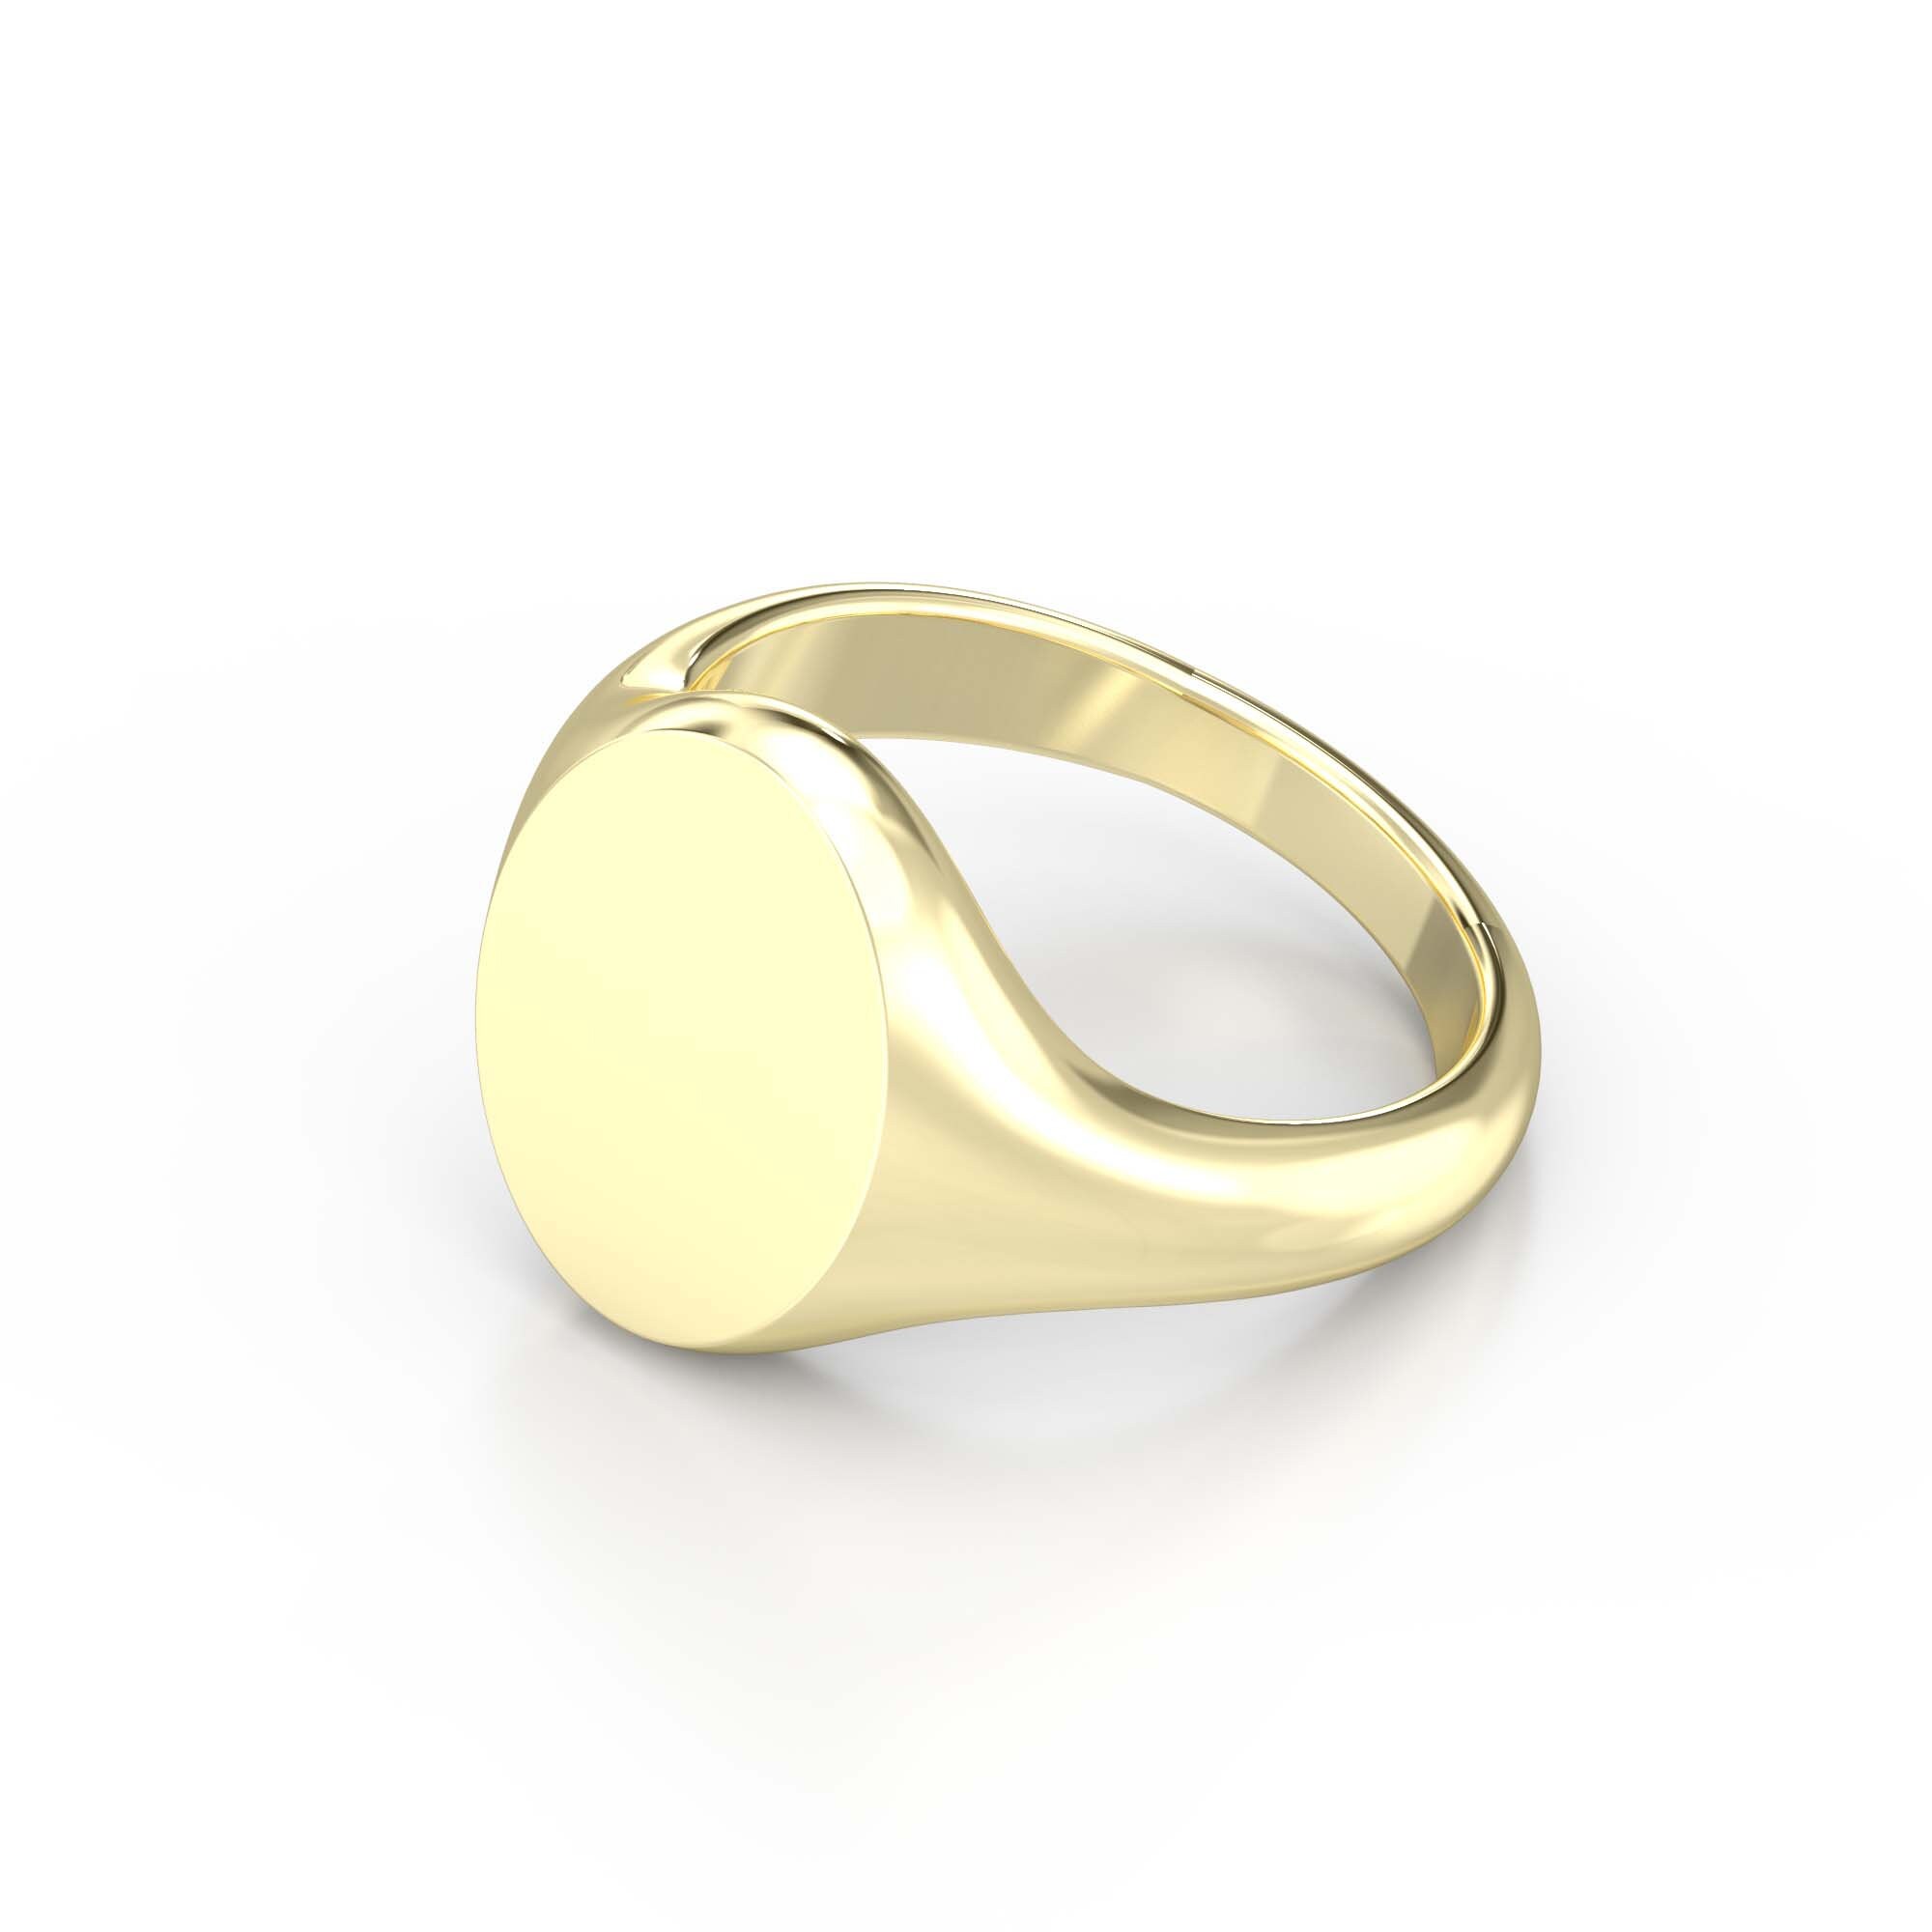 MB Essentials Oxford Ring in 14k Yellow Gold